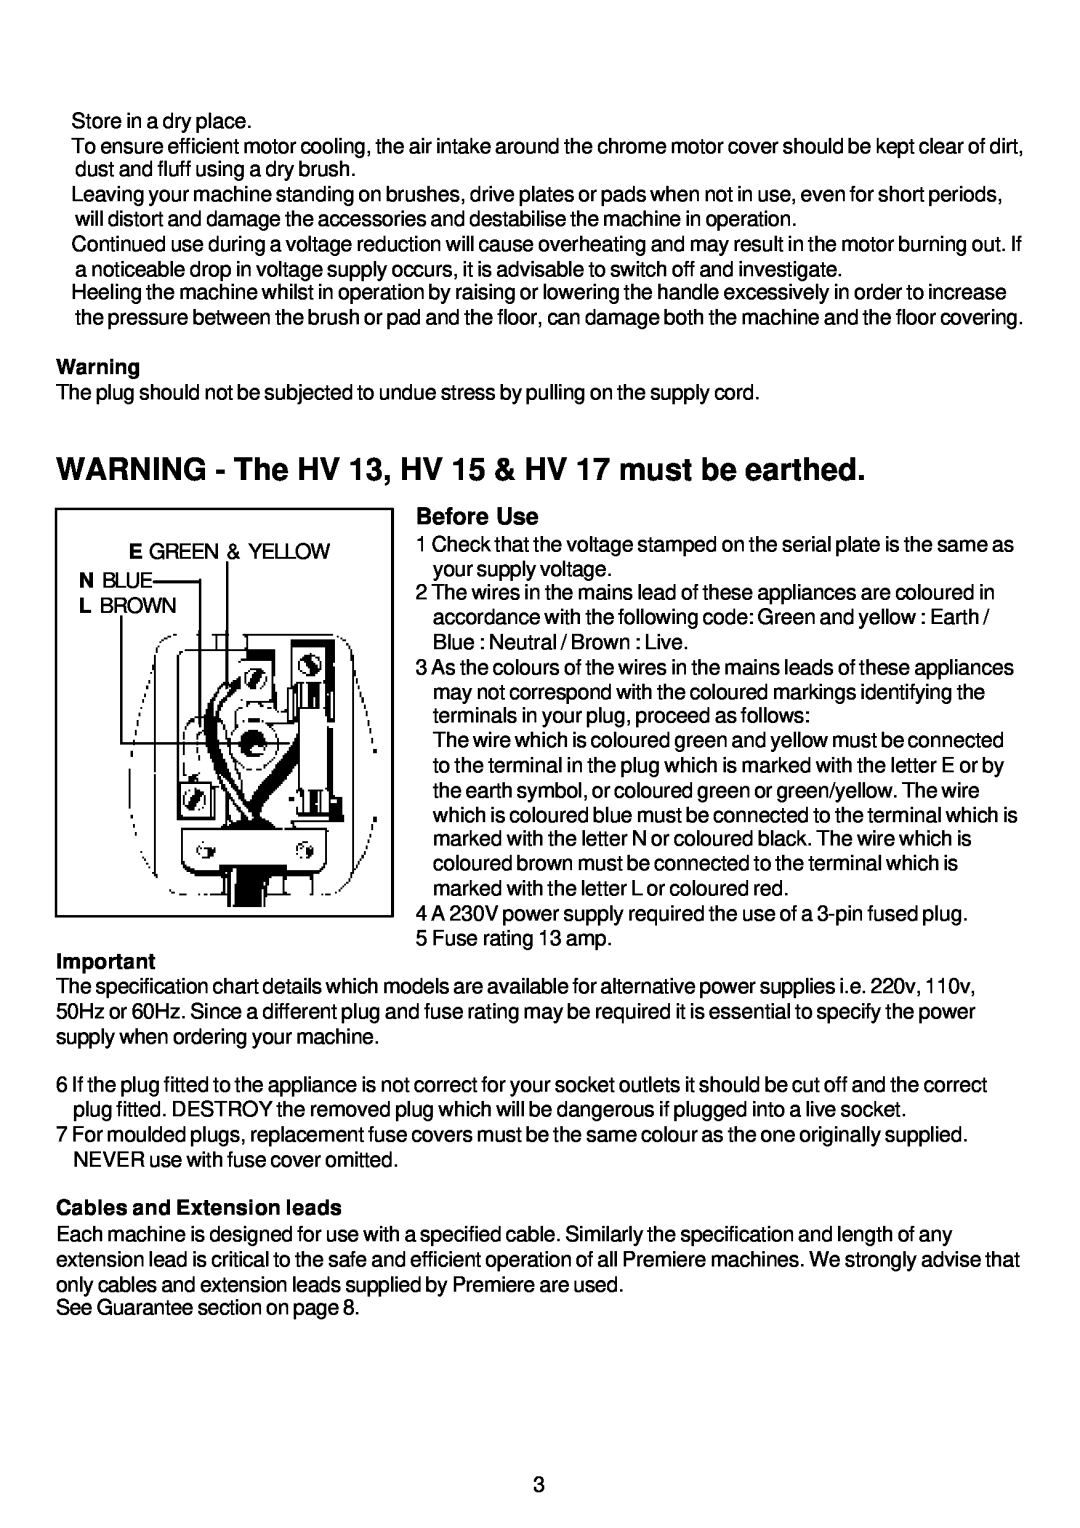 Premier WARNING - The HV 13, HV 15 & HV 17 must be earthed, Before Use, Cables and Extension leads 